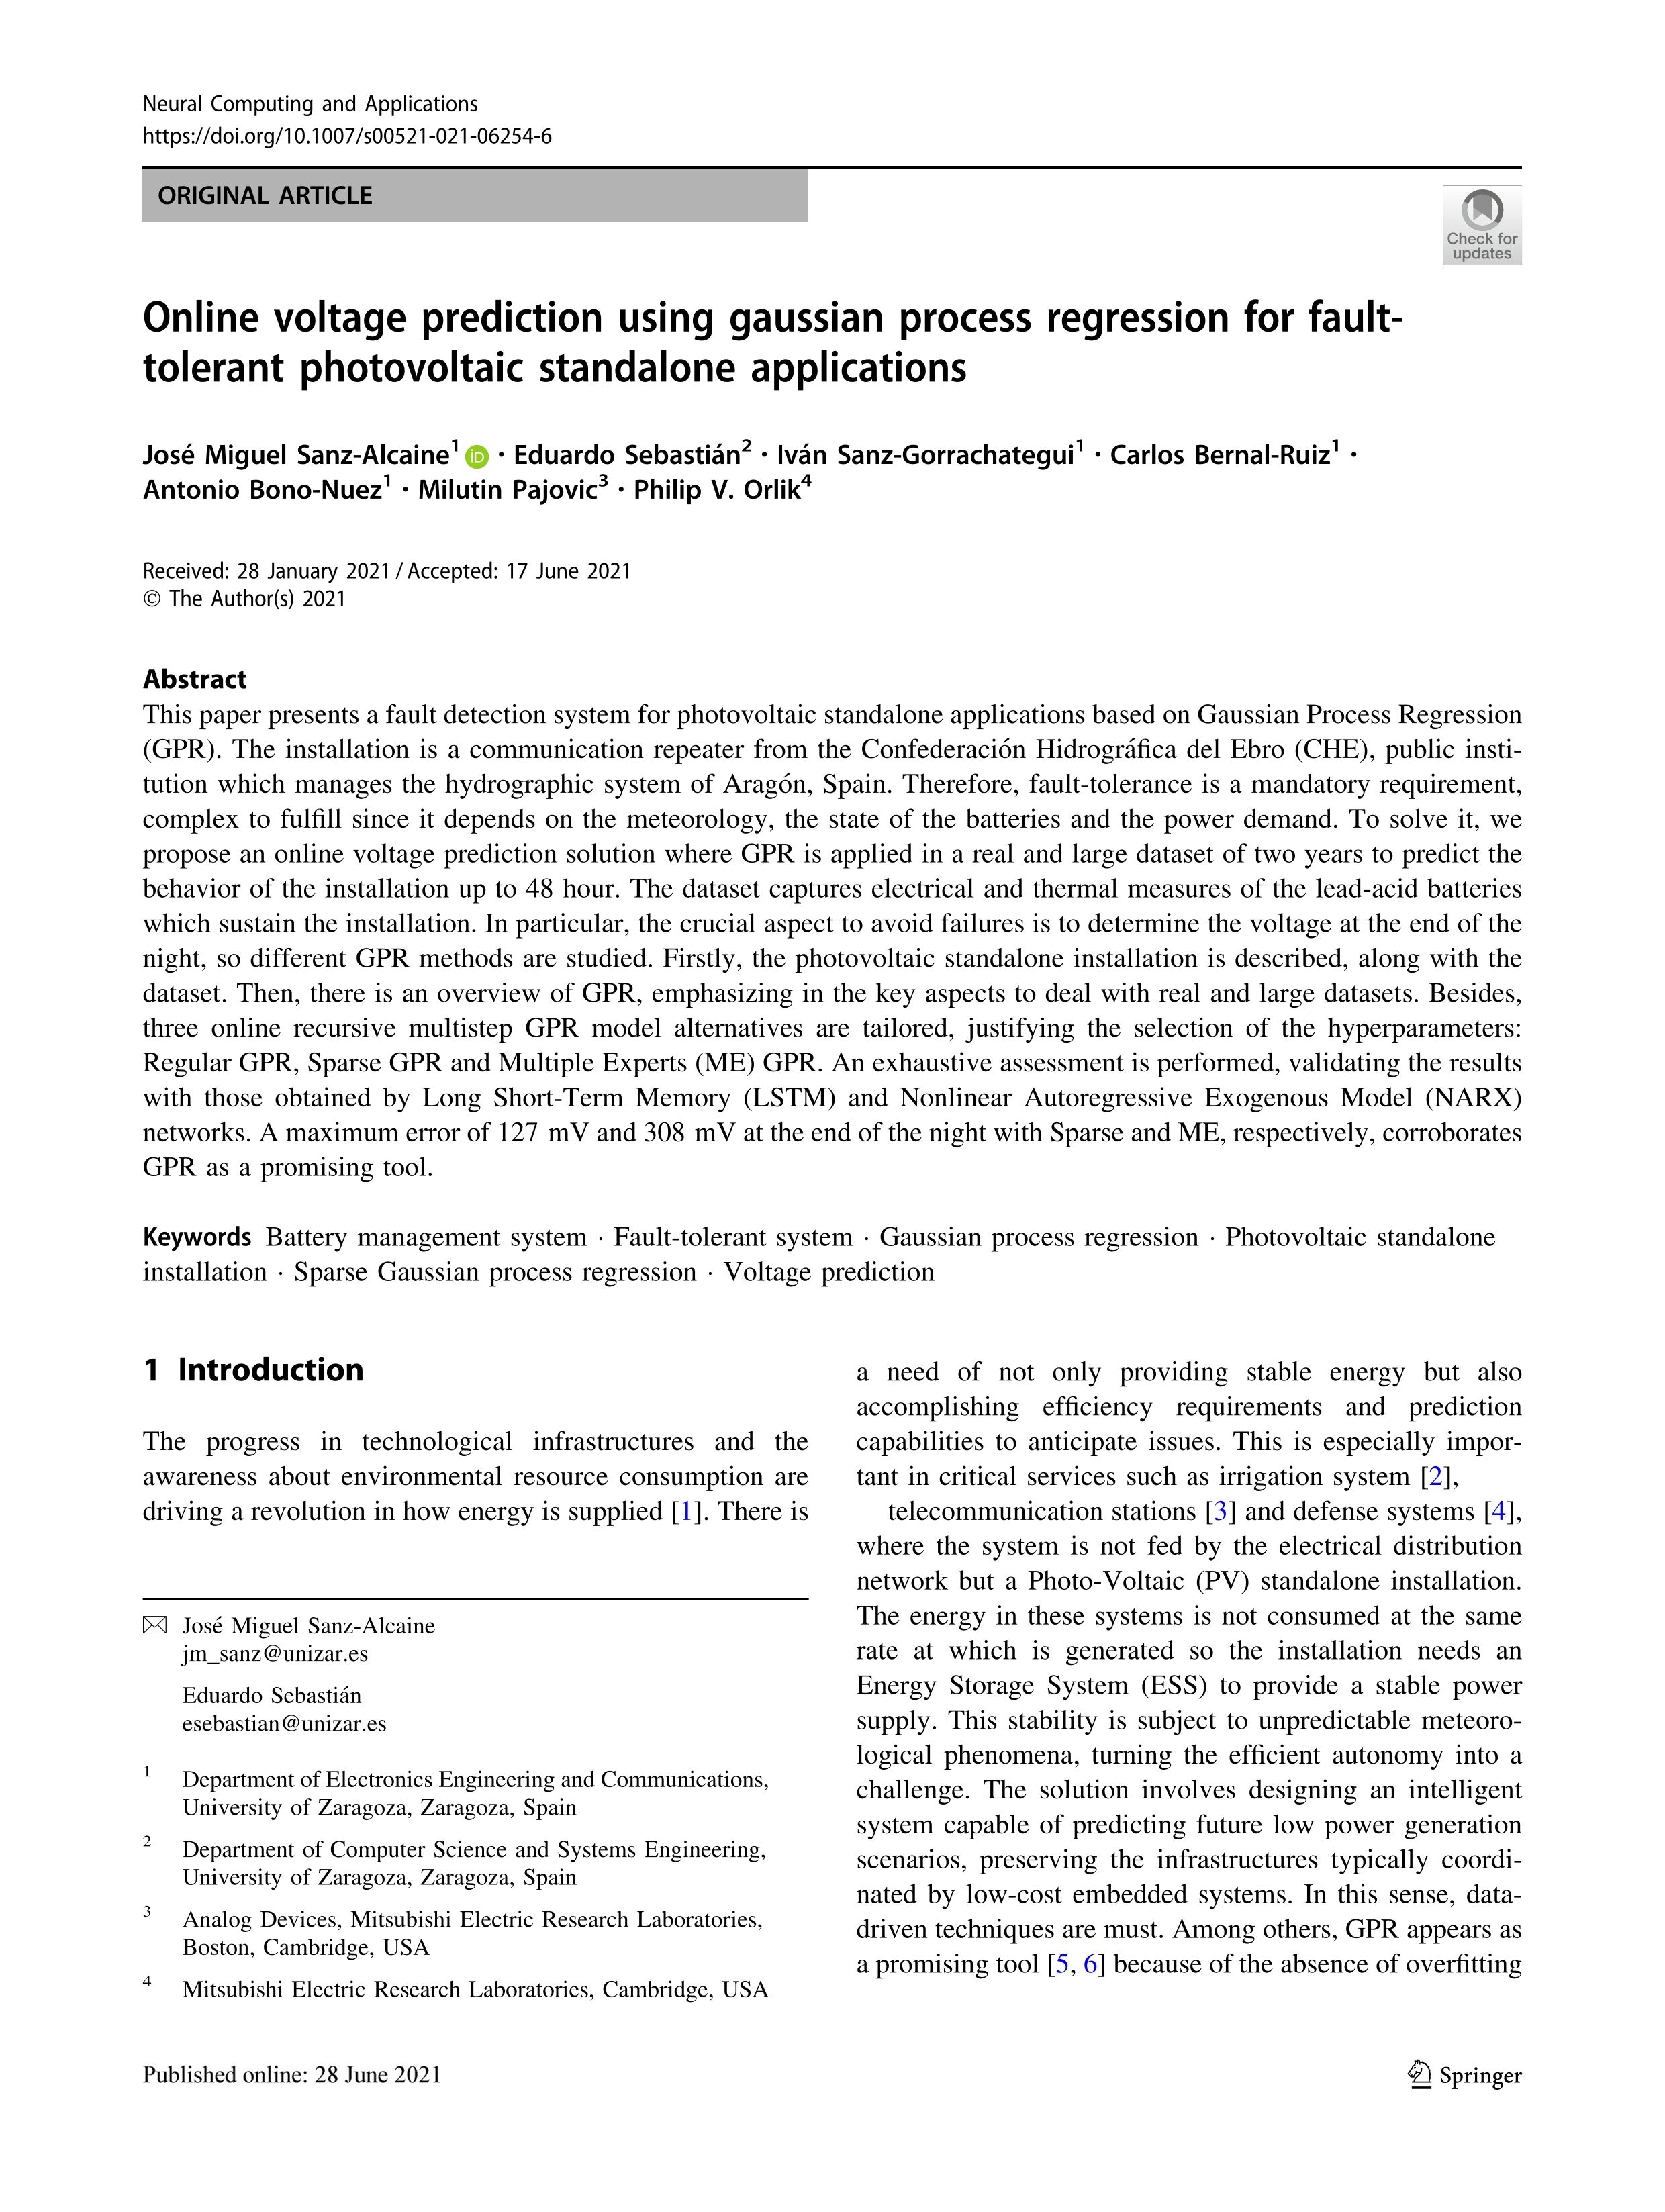 Online voltage prediction using gaussian process regression for fault-tolerant photovoltaic standalone applications